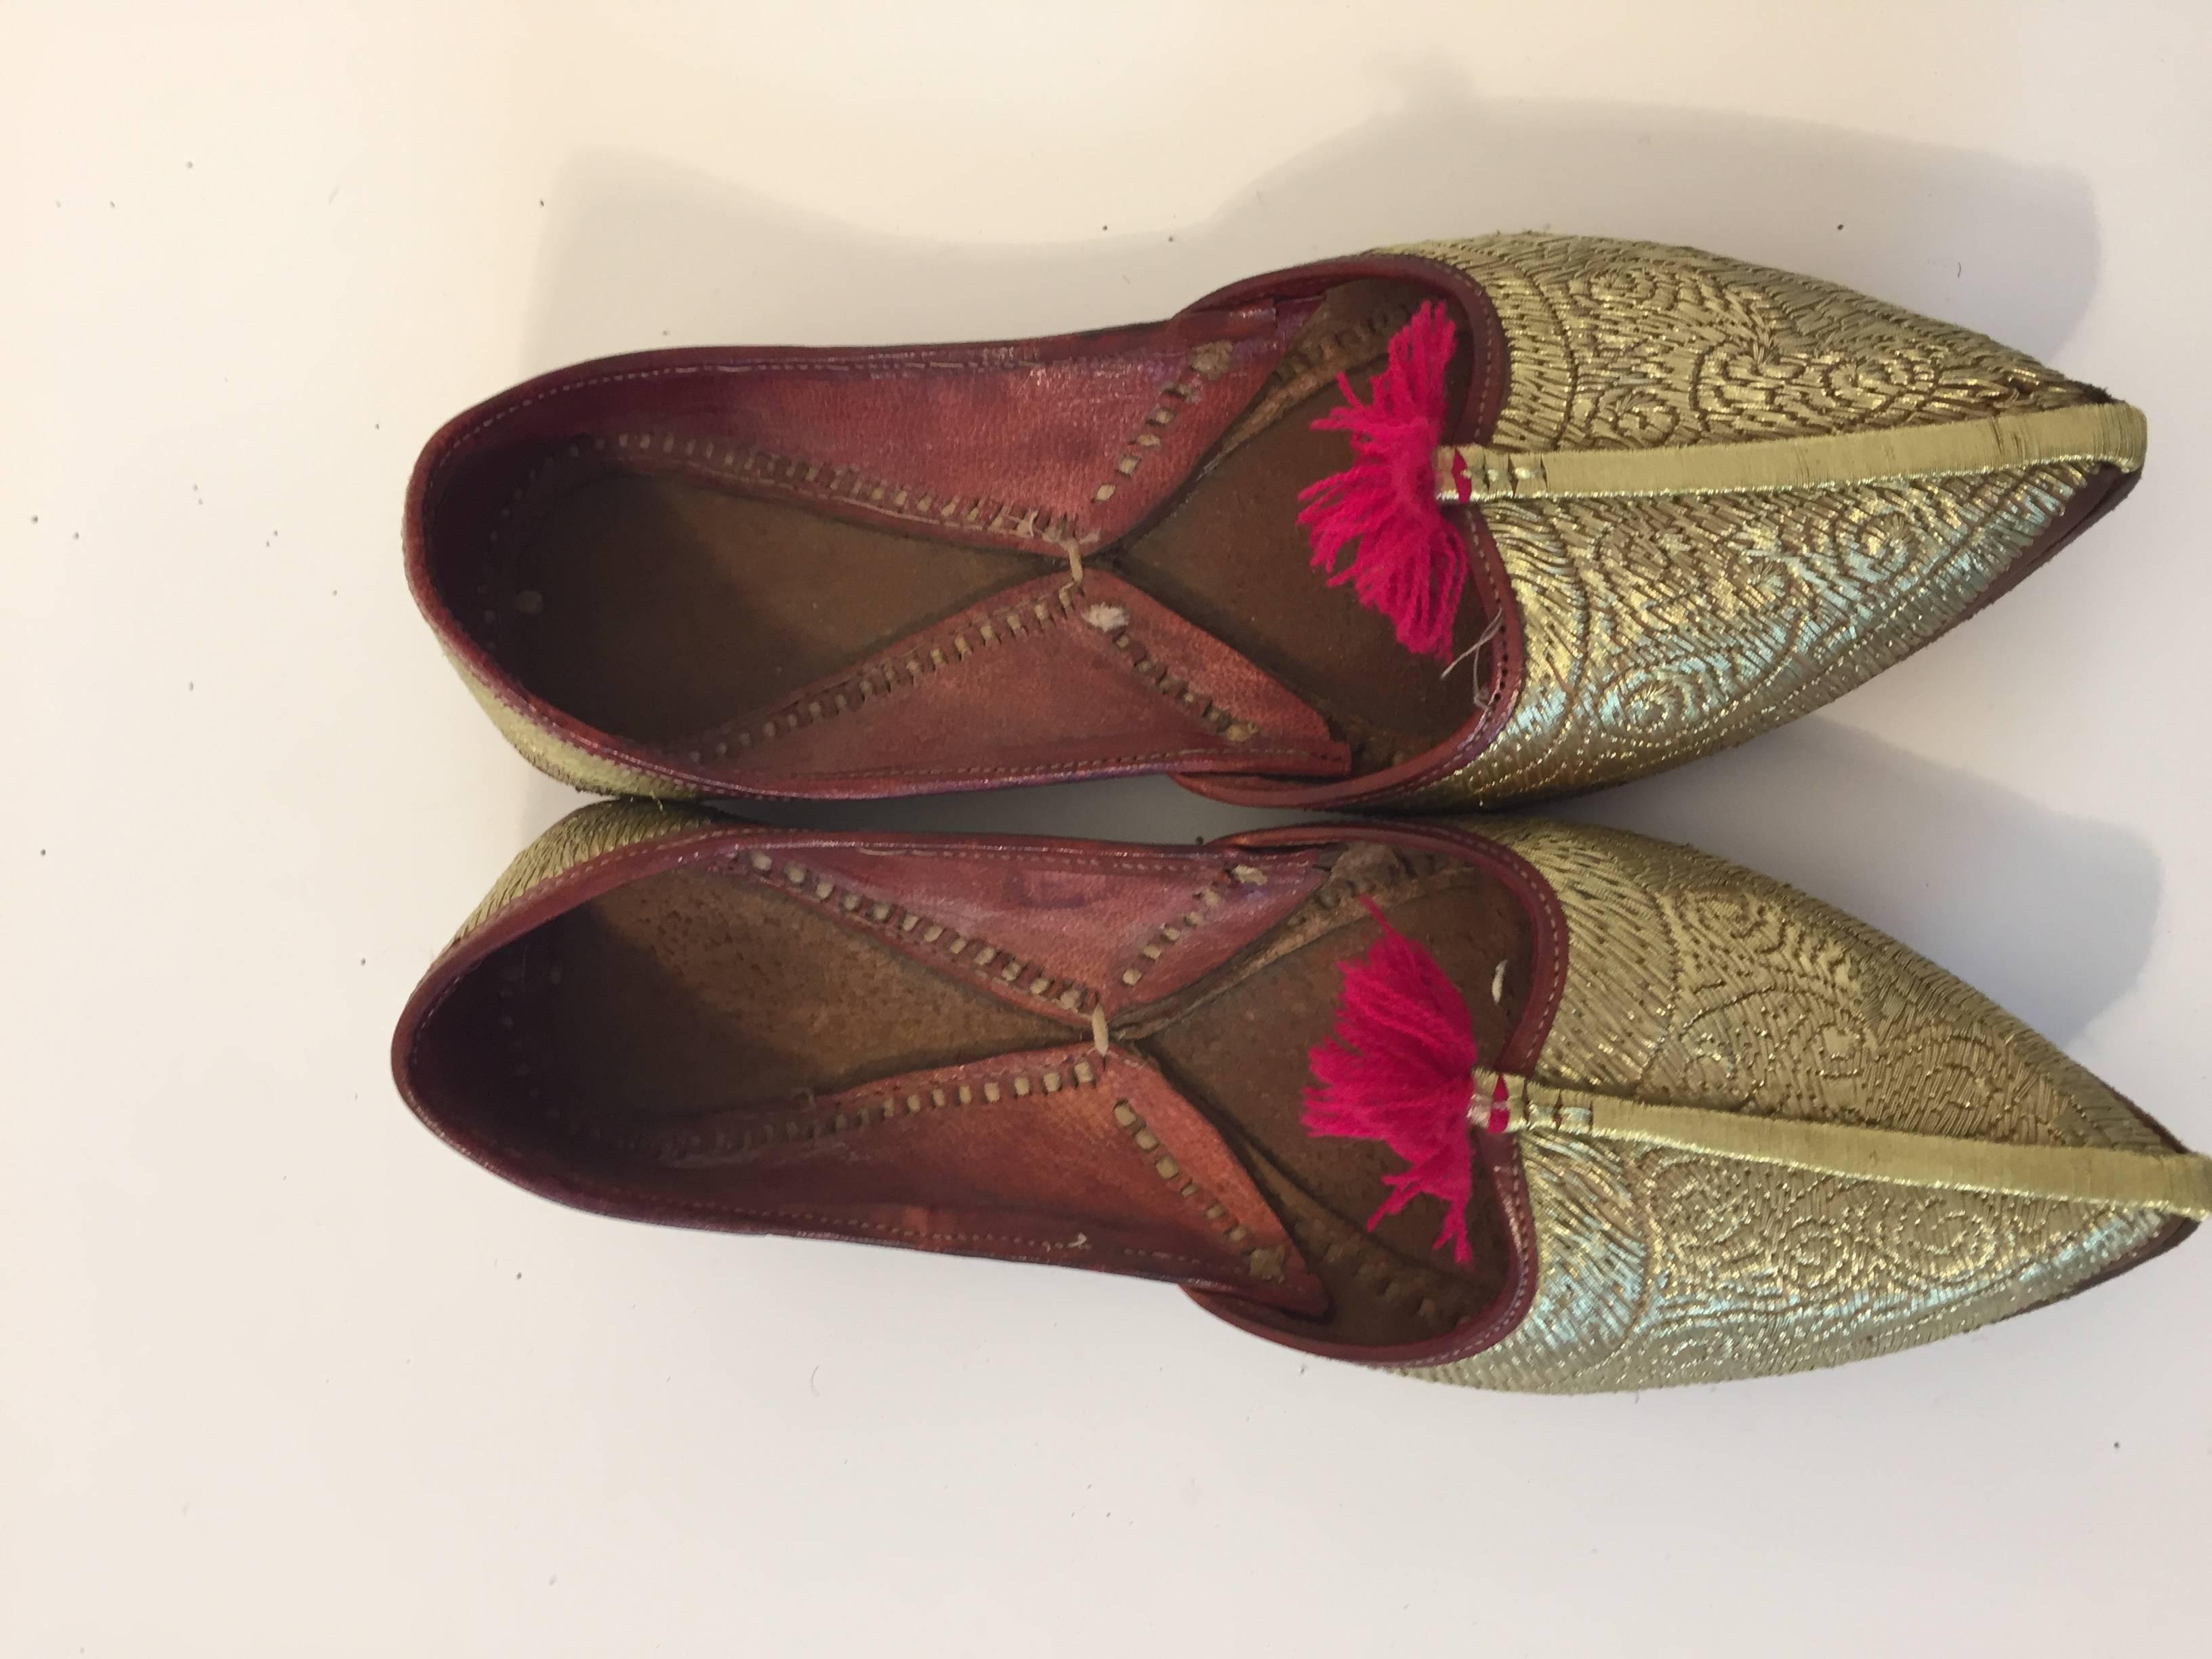 Vintage Moorish Turkish leather slippers with intricate gold embroideries pointed toe.
Leather hand-sewn and embroidered with metallic gold thread ethnic flat loafers.
Great pair of exotic slippers to use for your next Moroccan, Arabian Night party